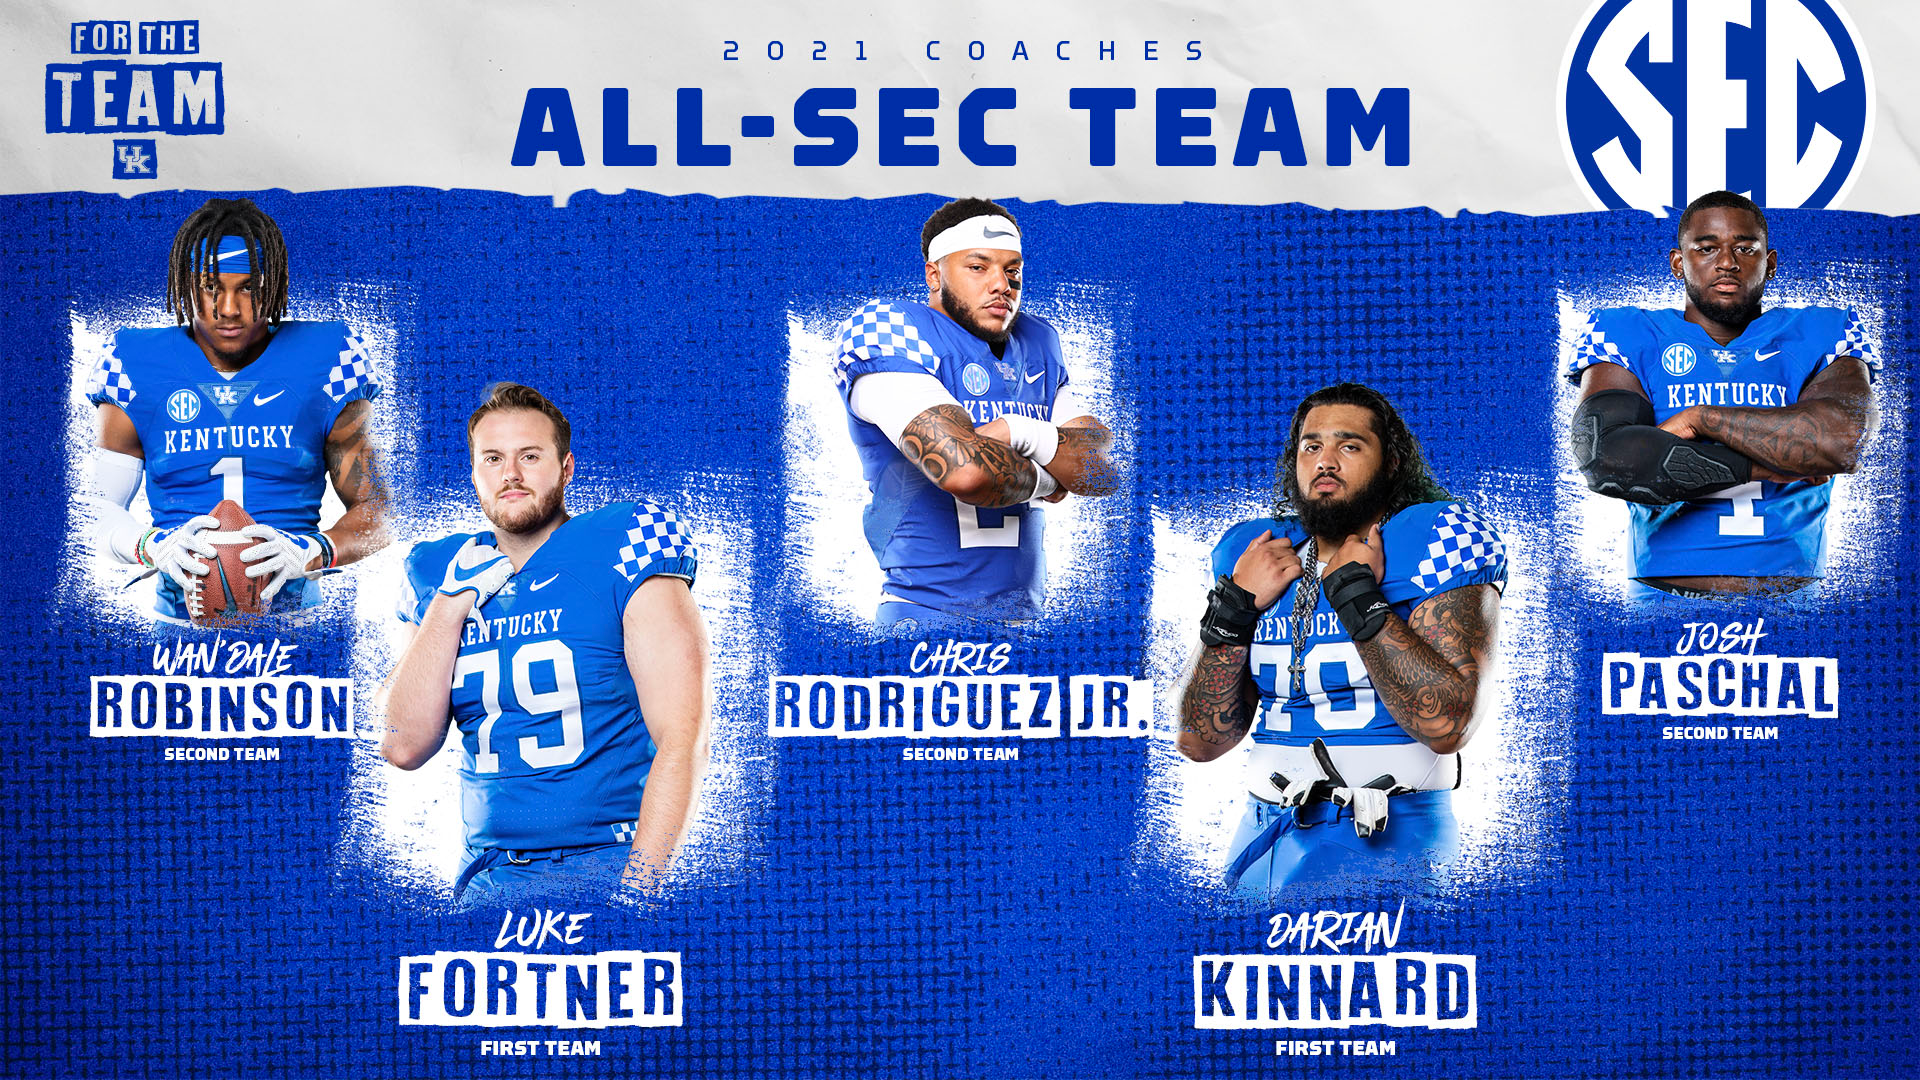 Five Wildcats Named to Coaches’ All-SEC Teams